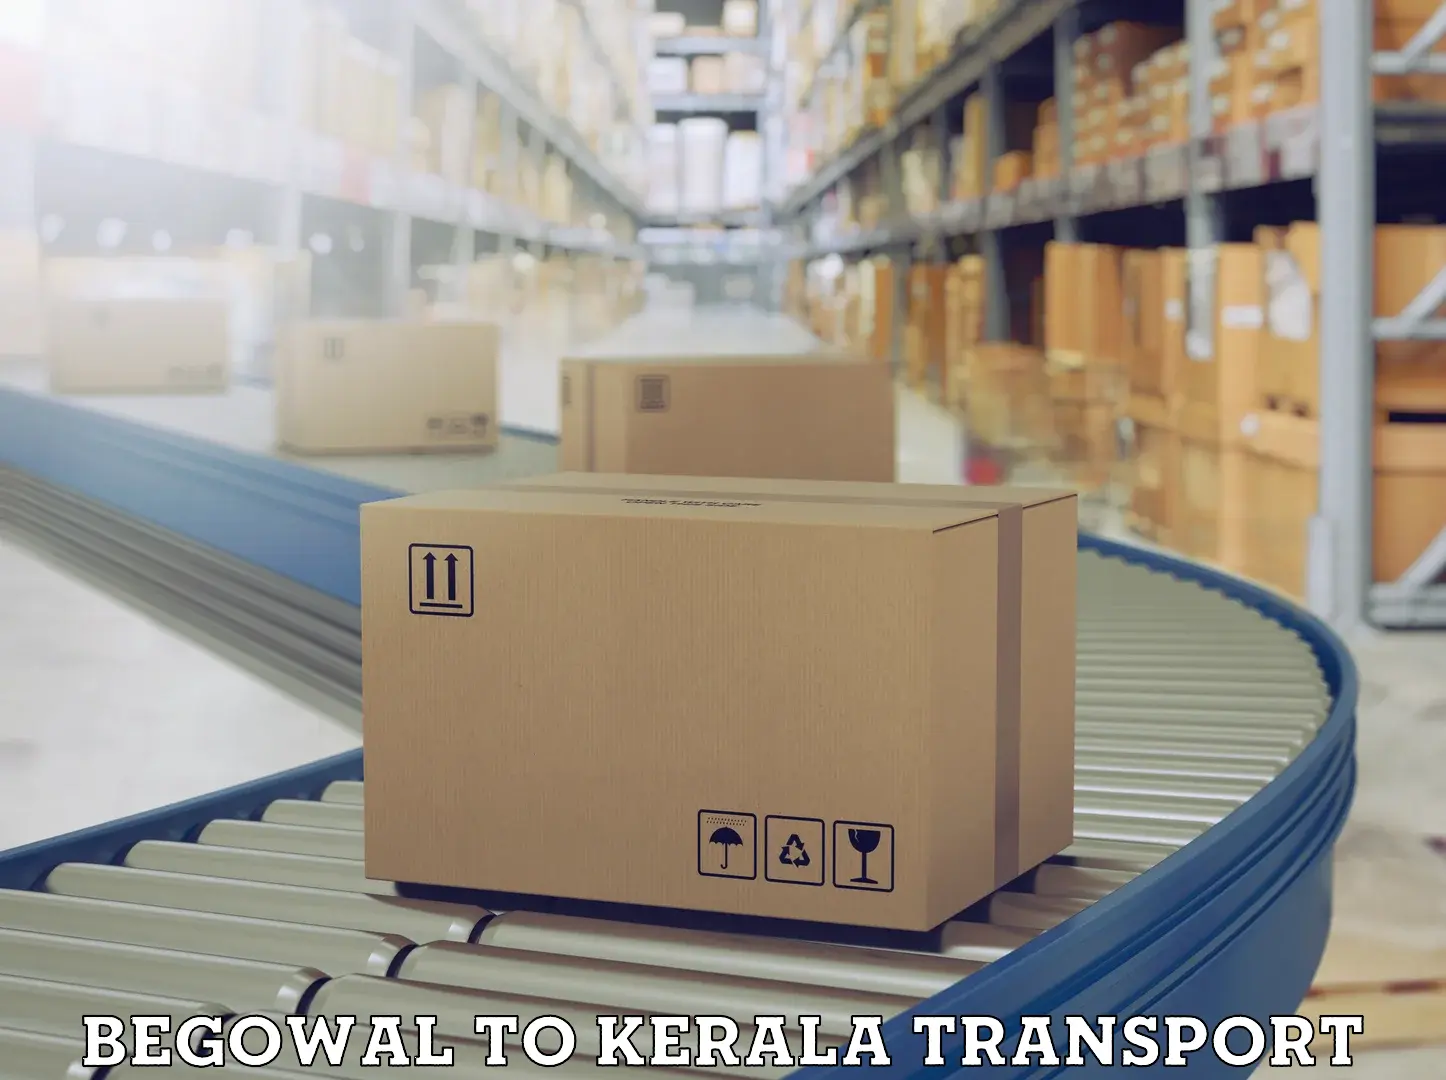 Two wheeler parcel service Begowal to Kozhikode